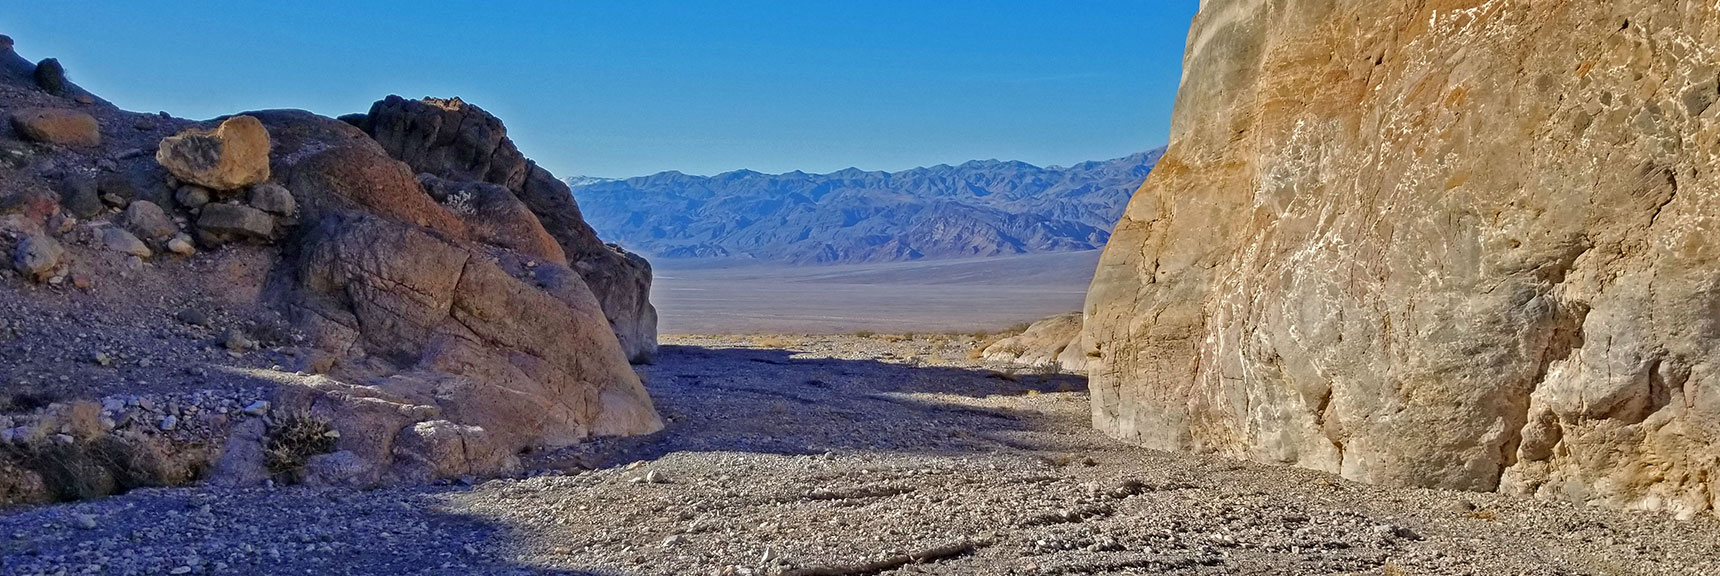 A Look Back Through Fall Canyon's Lower Opening into Death Valley | Fall Canyon | Death Valley National Park, California